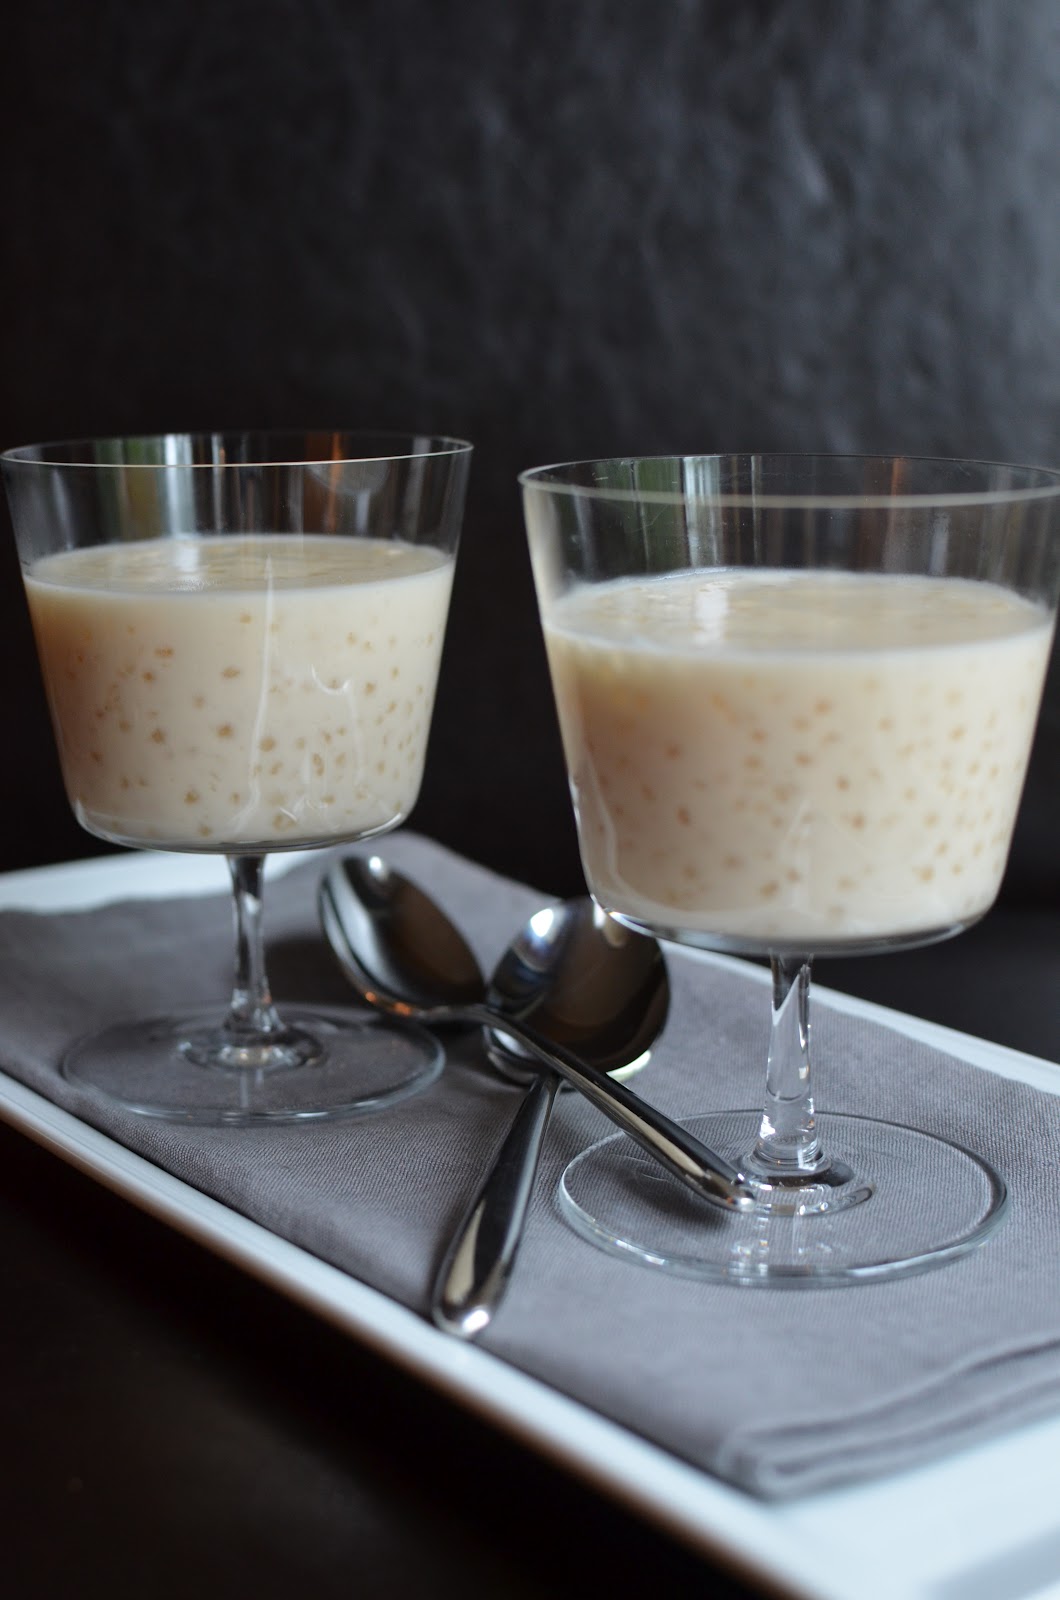 Playing with Flour: Coconut tapioca pudding